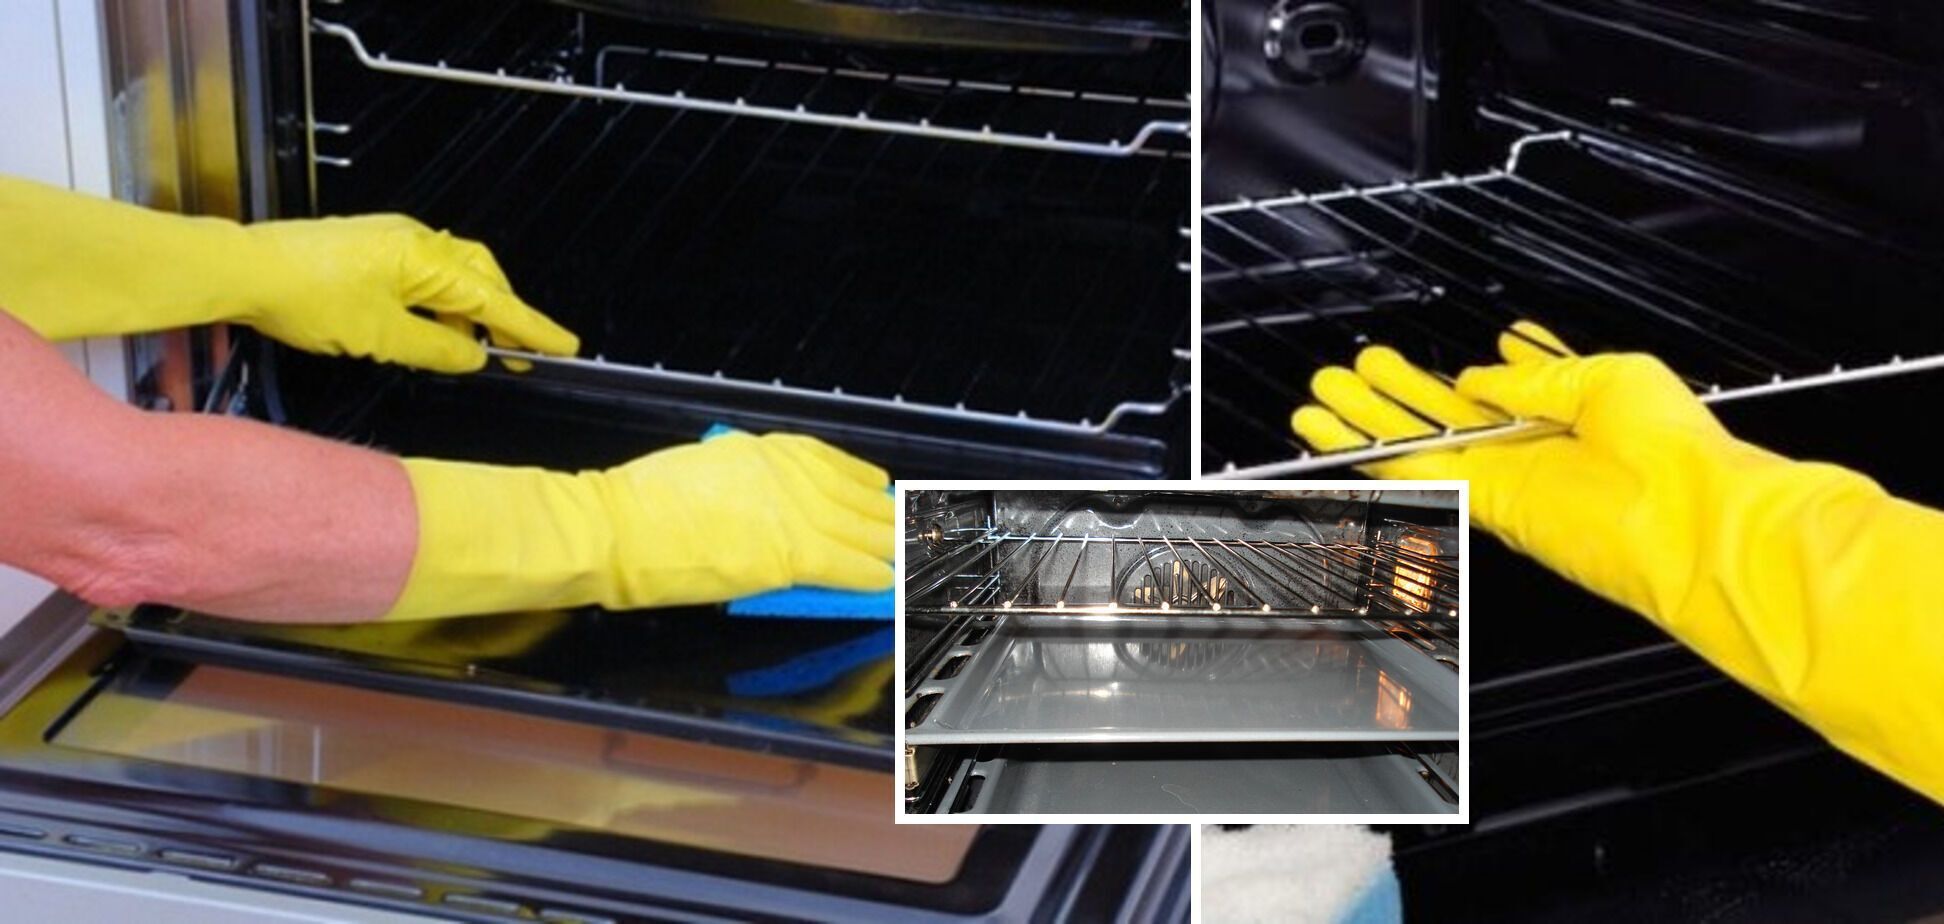 How to clean an oven